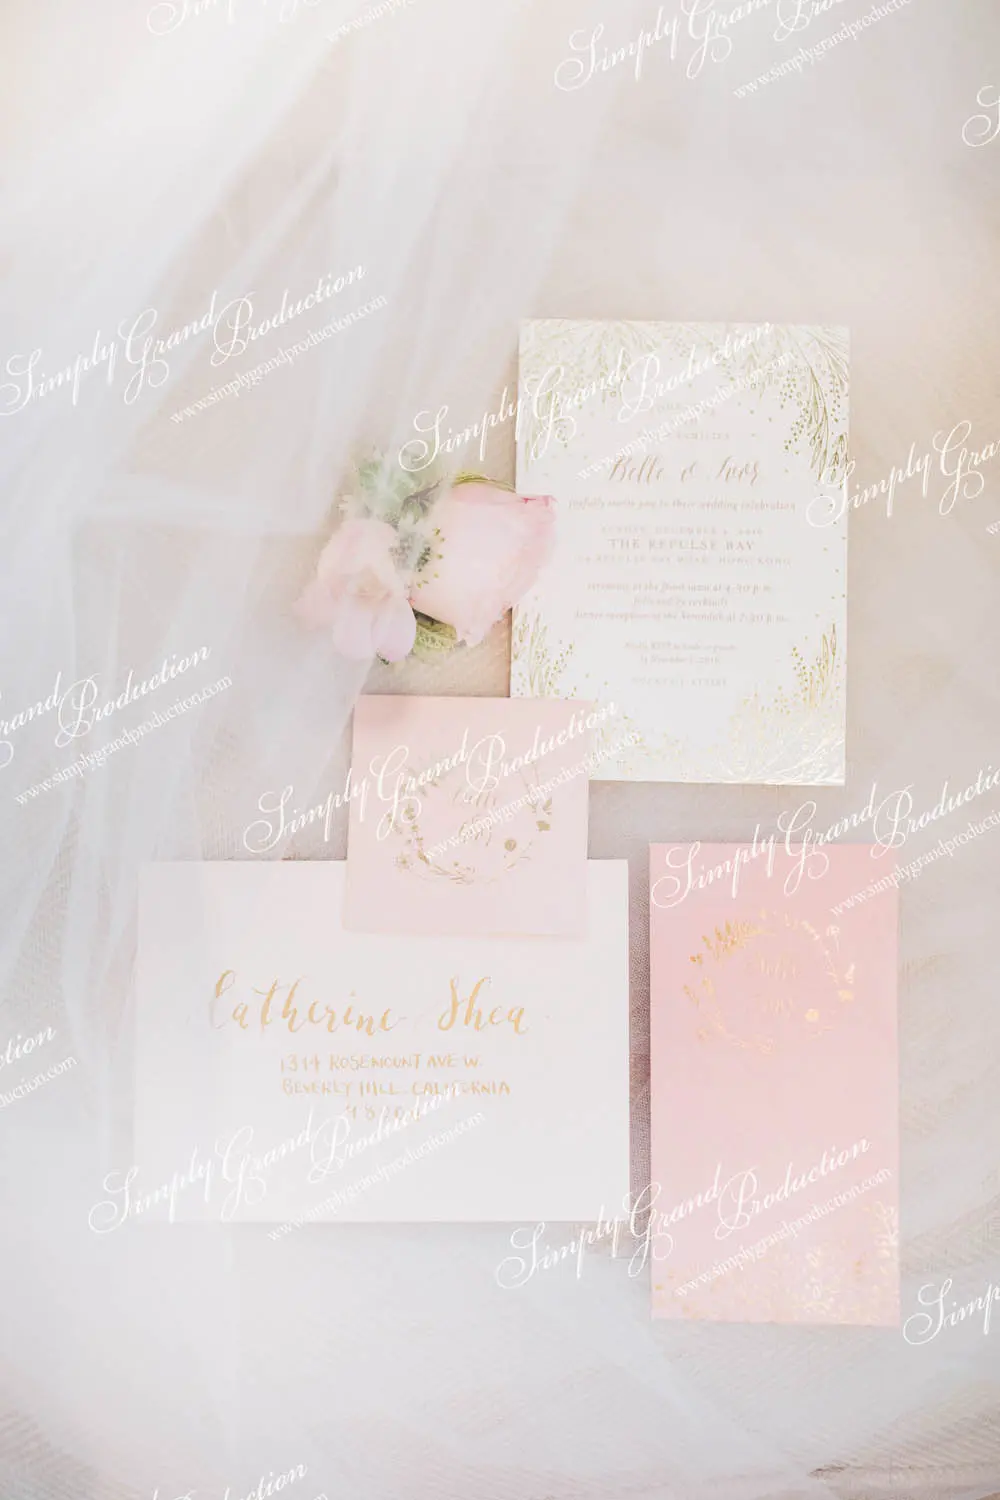 Simply_Grand_Production_Outdoor_wedding_decoration_calligraphy_stationery_invitation_Repulse_Bay_1_2.jpg